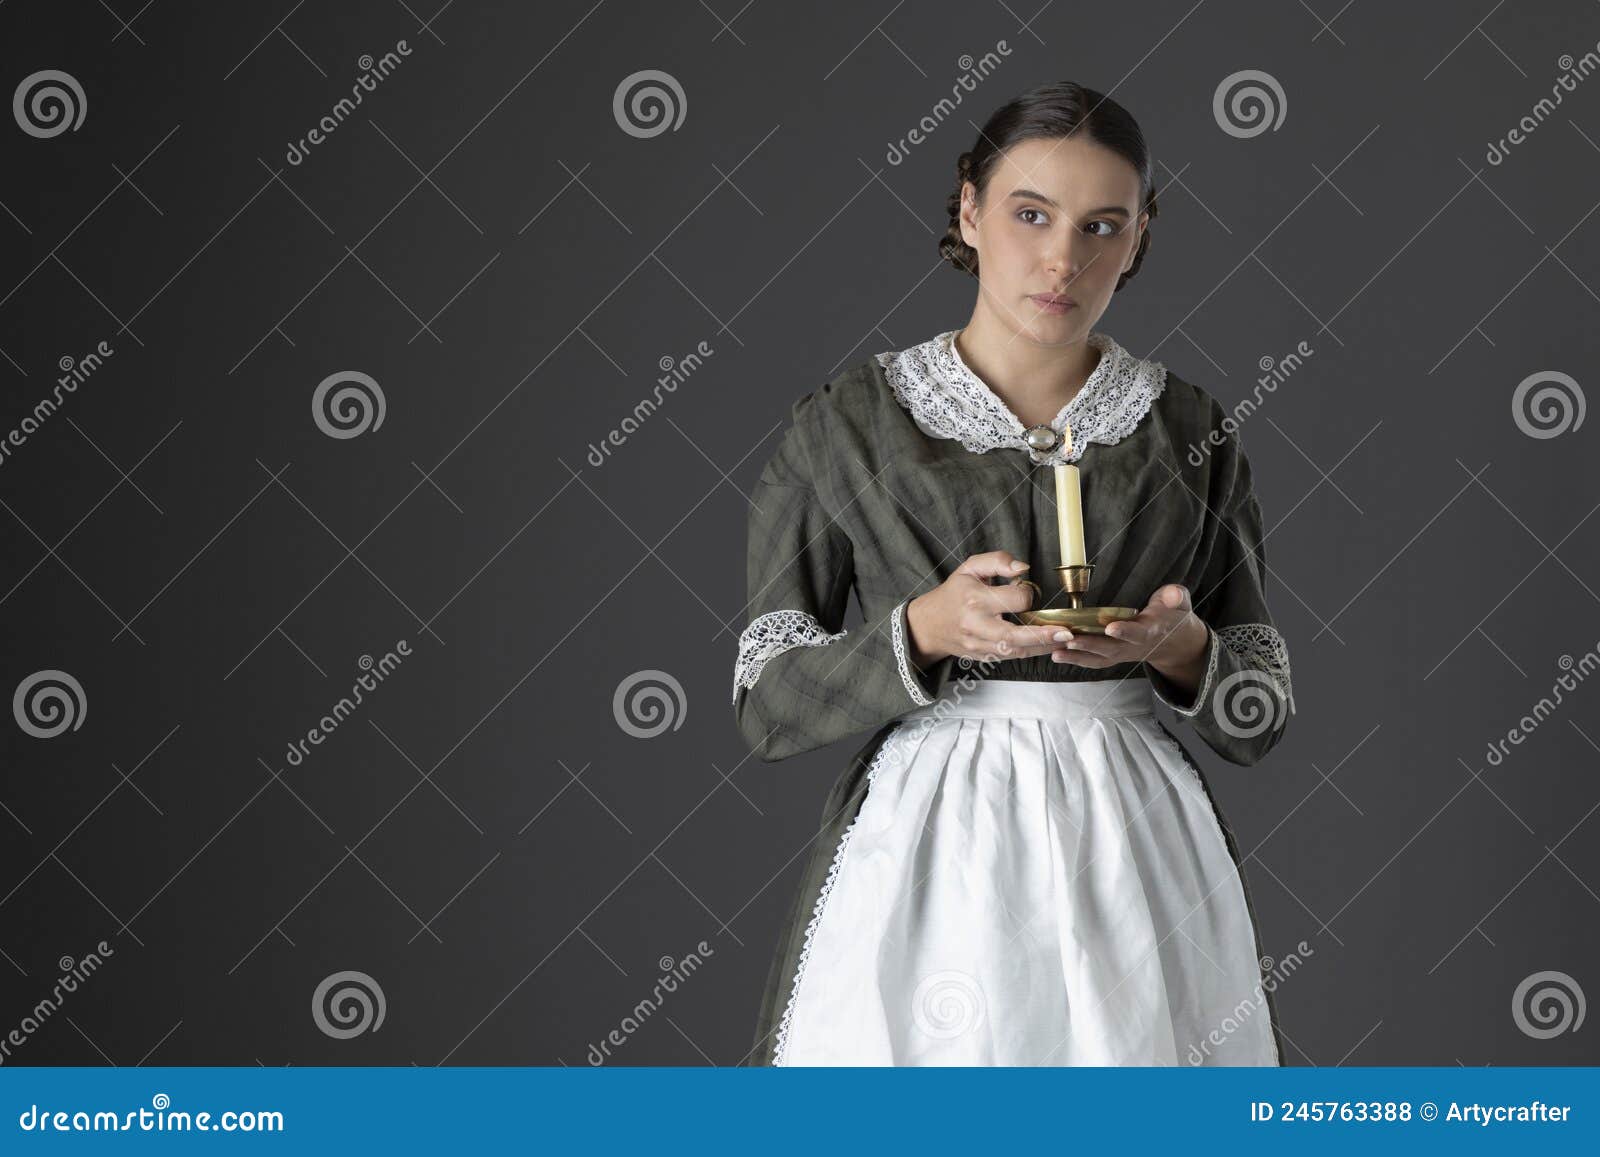 a working class victorian woman wearing a dark green check bodice and skirt with an apron and holding a candle.